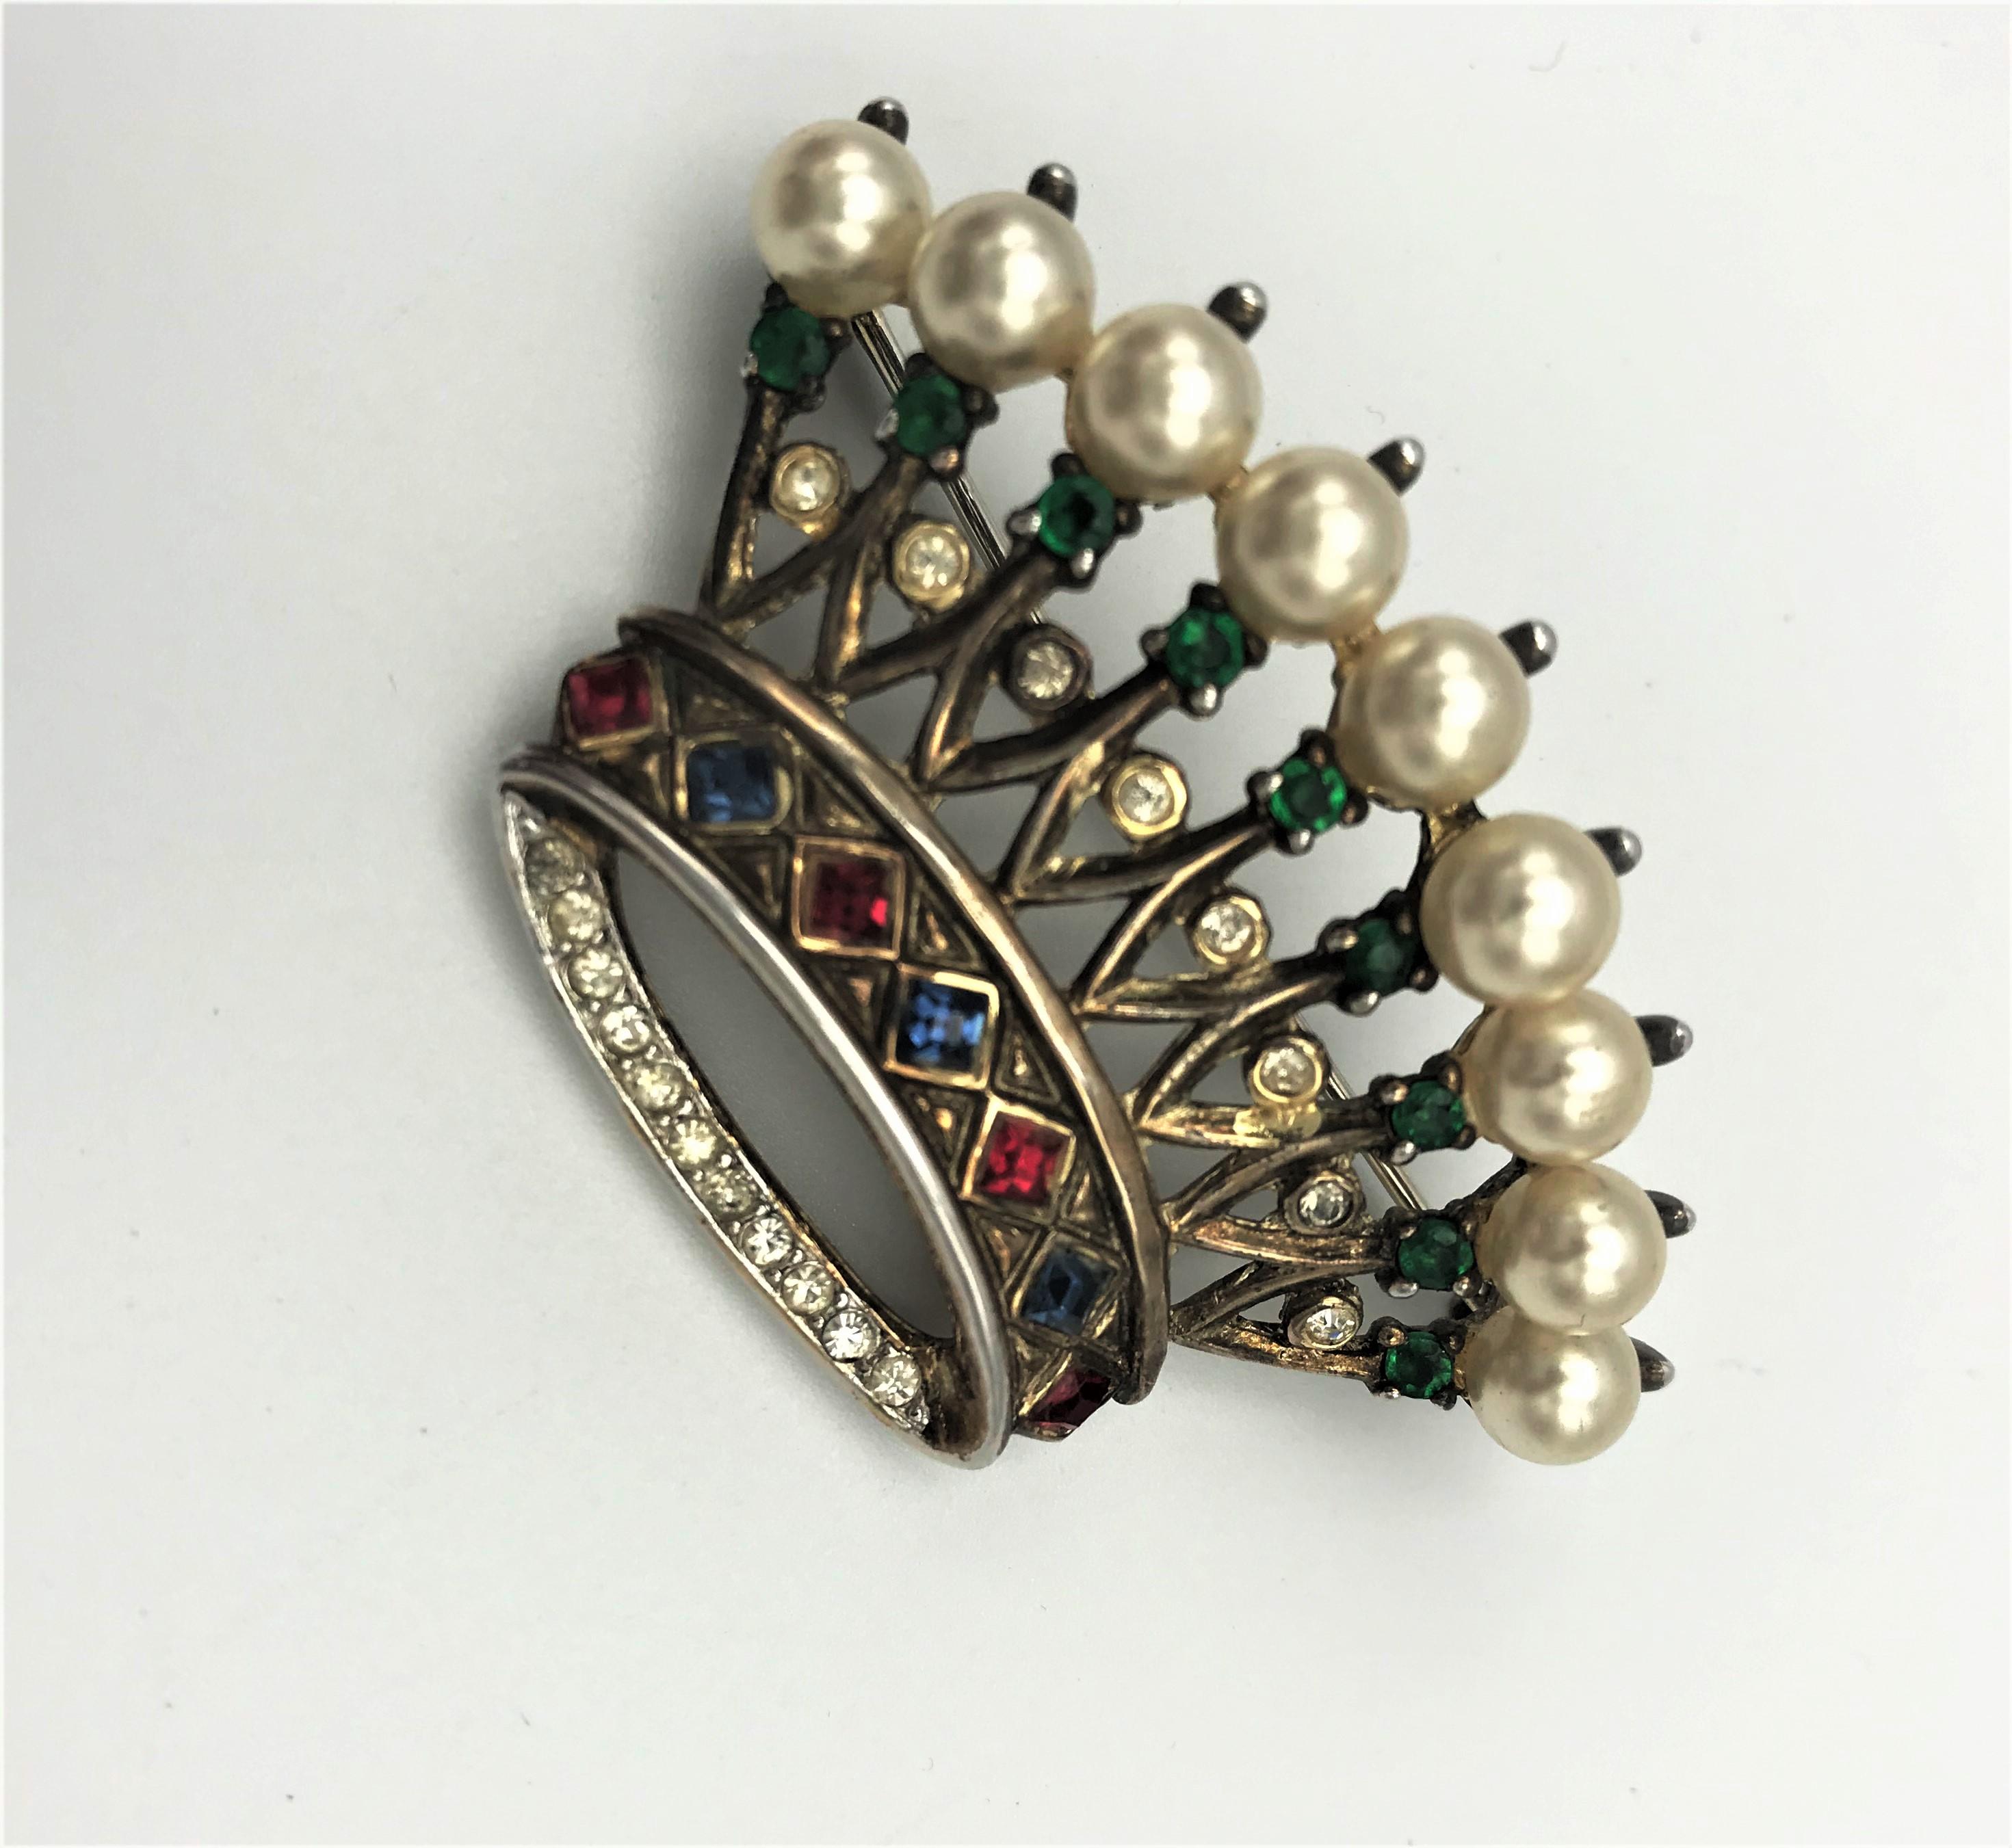 Trifari crown brooch of vermeil sterling with emerald green ruby red, and clear rhinestones, and a ring of faux pearls. 1940s
Measurement: 5 cm (2 